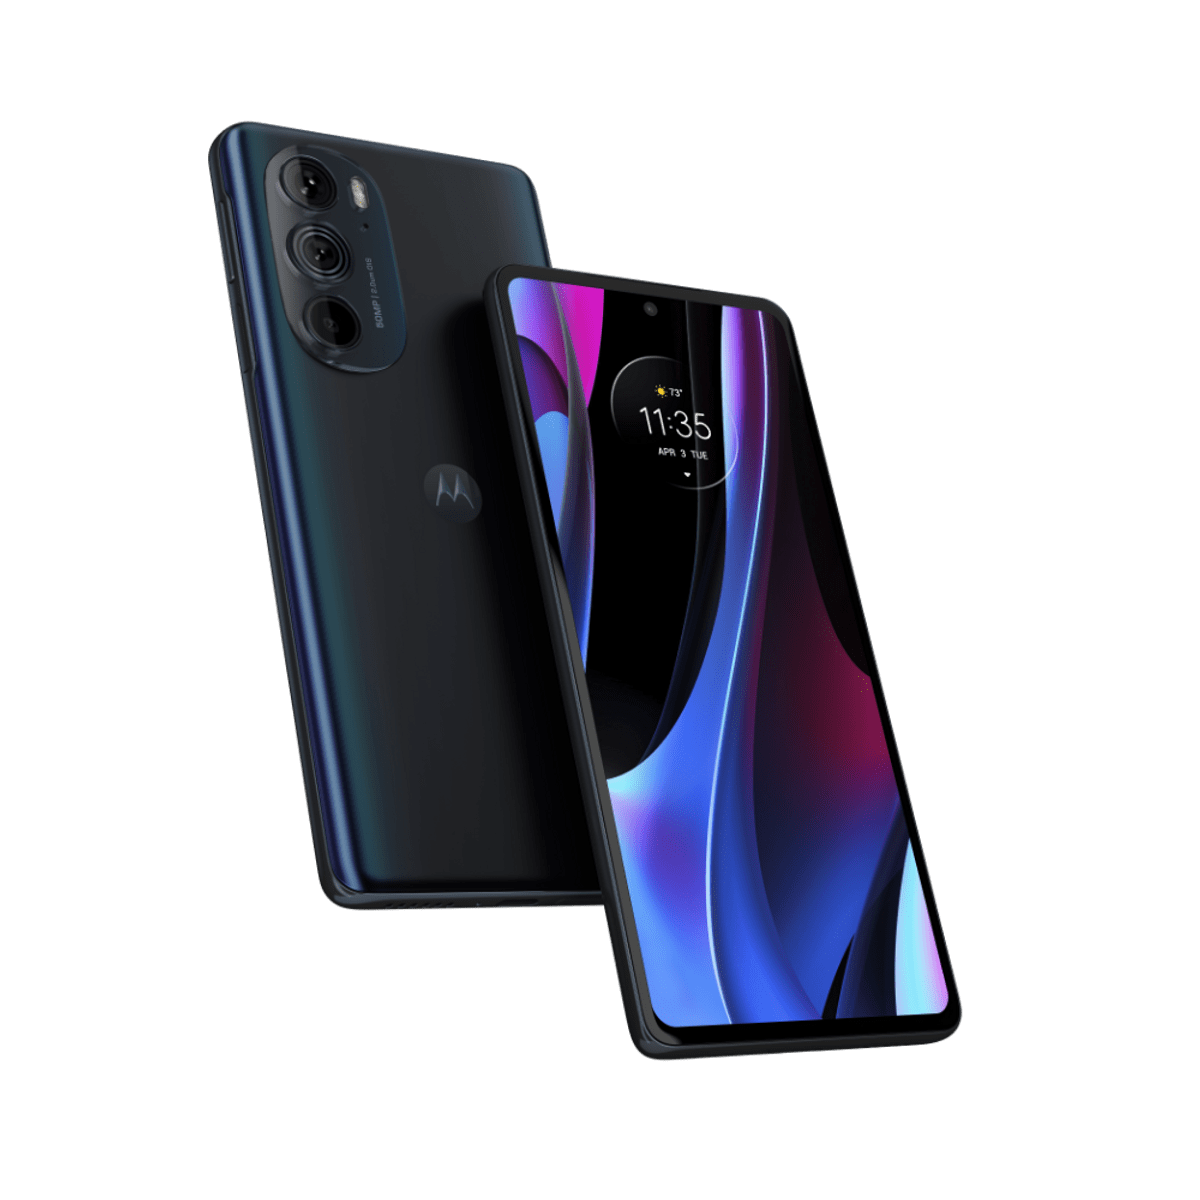  Oppo Find X5 Pro 5G Dual 256GB 12GB RAM Factory Unlocked (GSM  Only, No CDMA - not Compatible with Verizon/Sprint) China Version